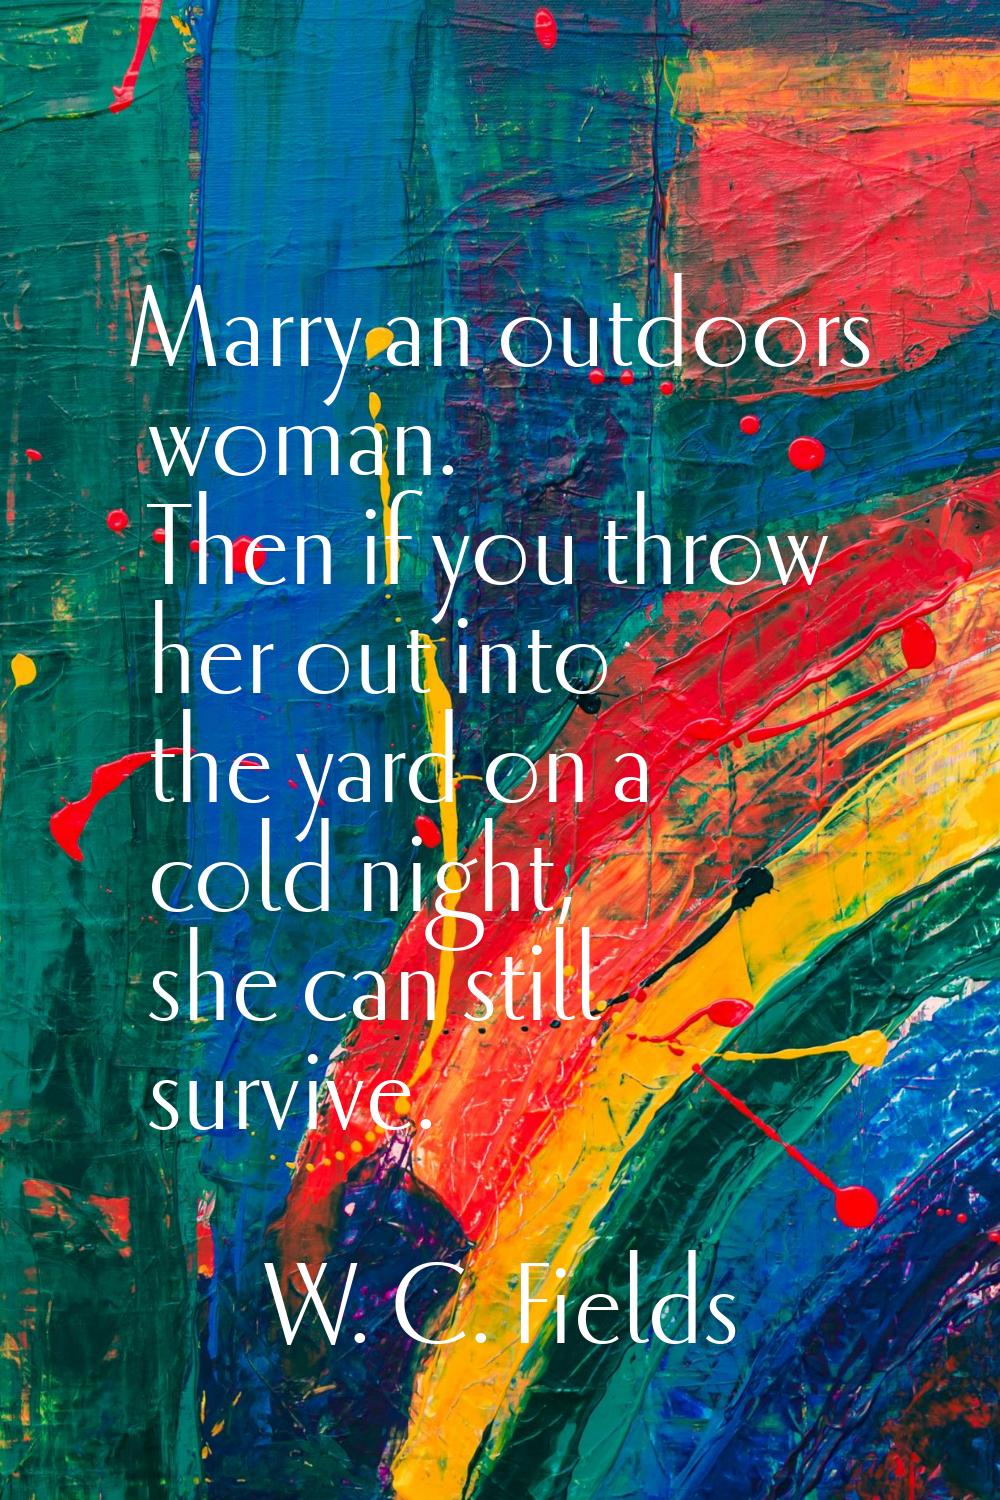 Marry an outdoors woman. Then if you throw her out into the yard on a cold night, she can still sur